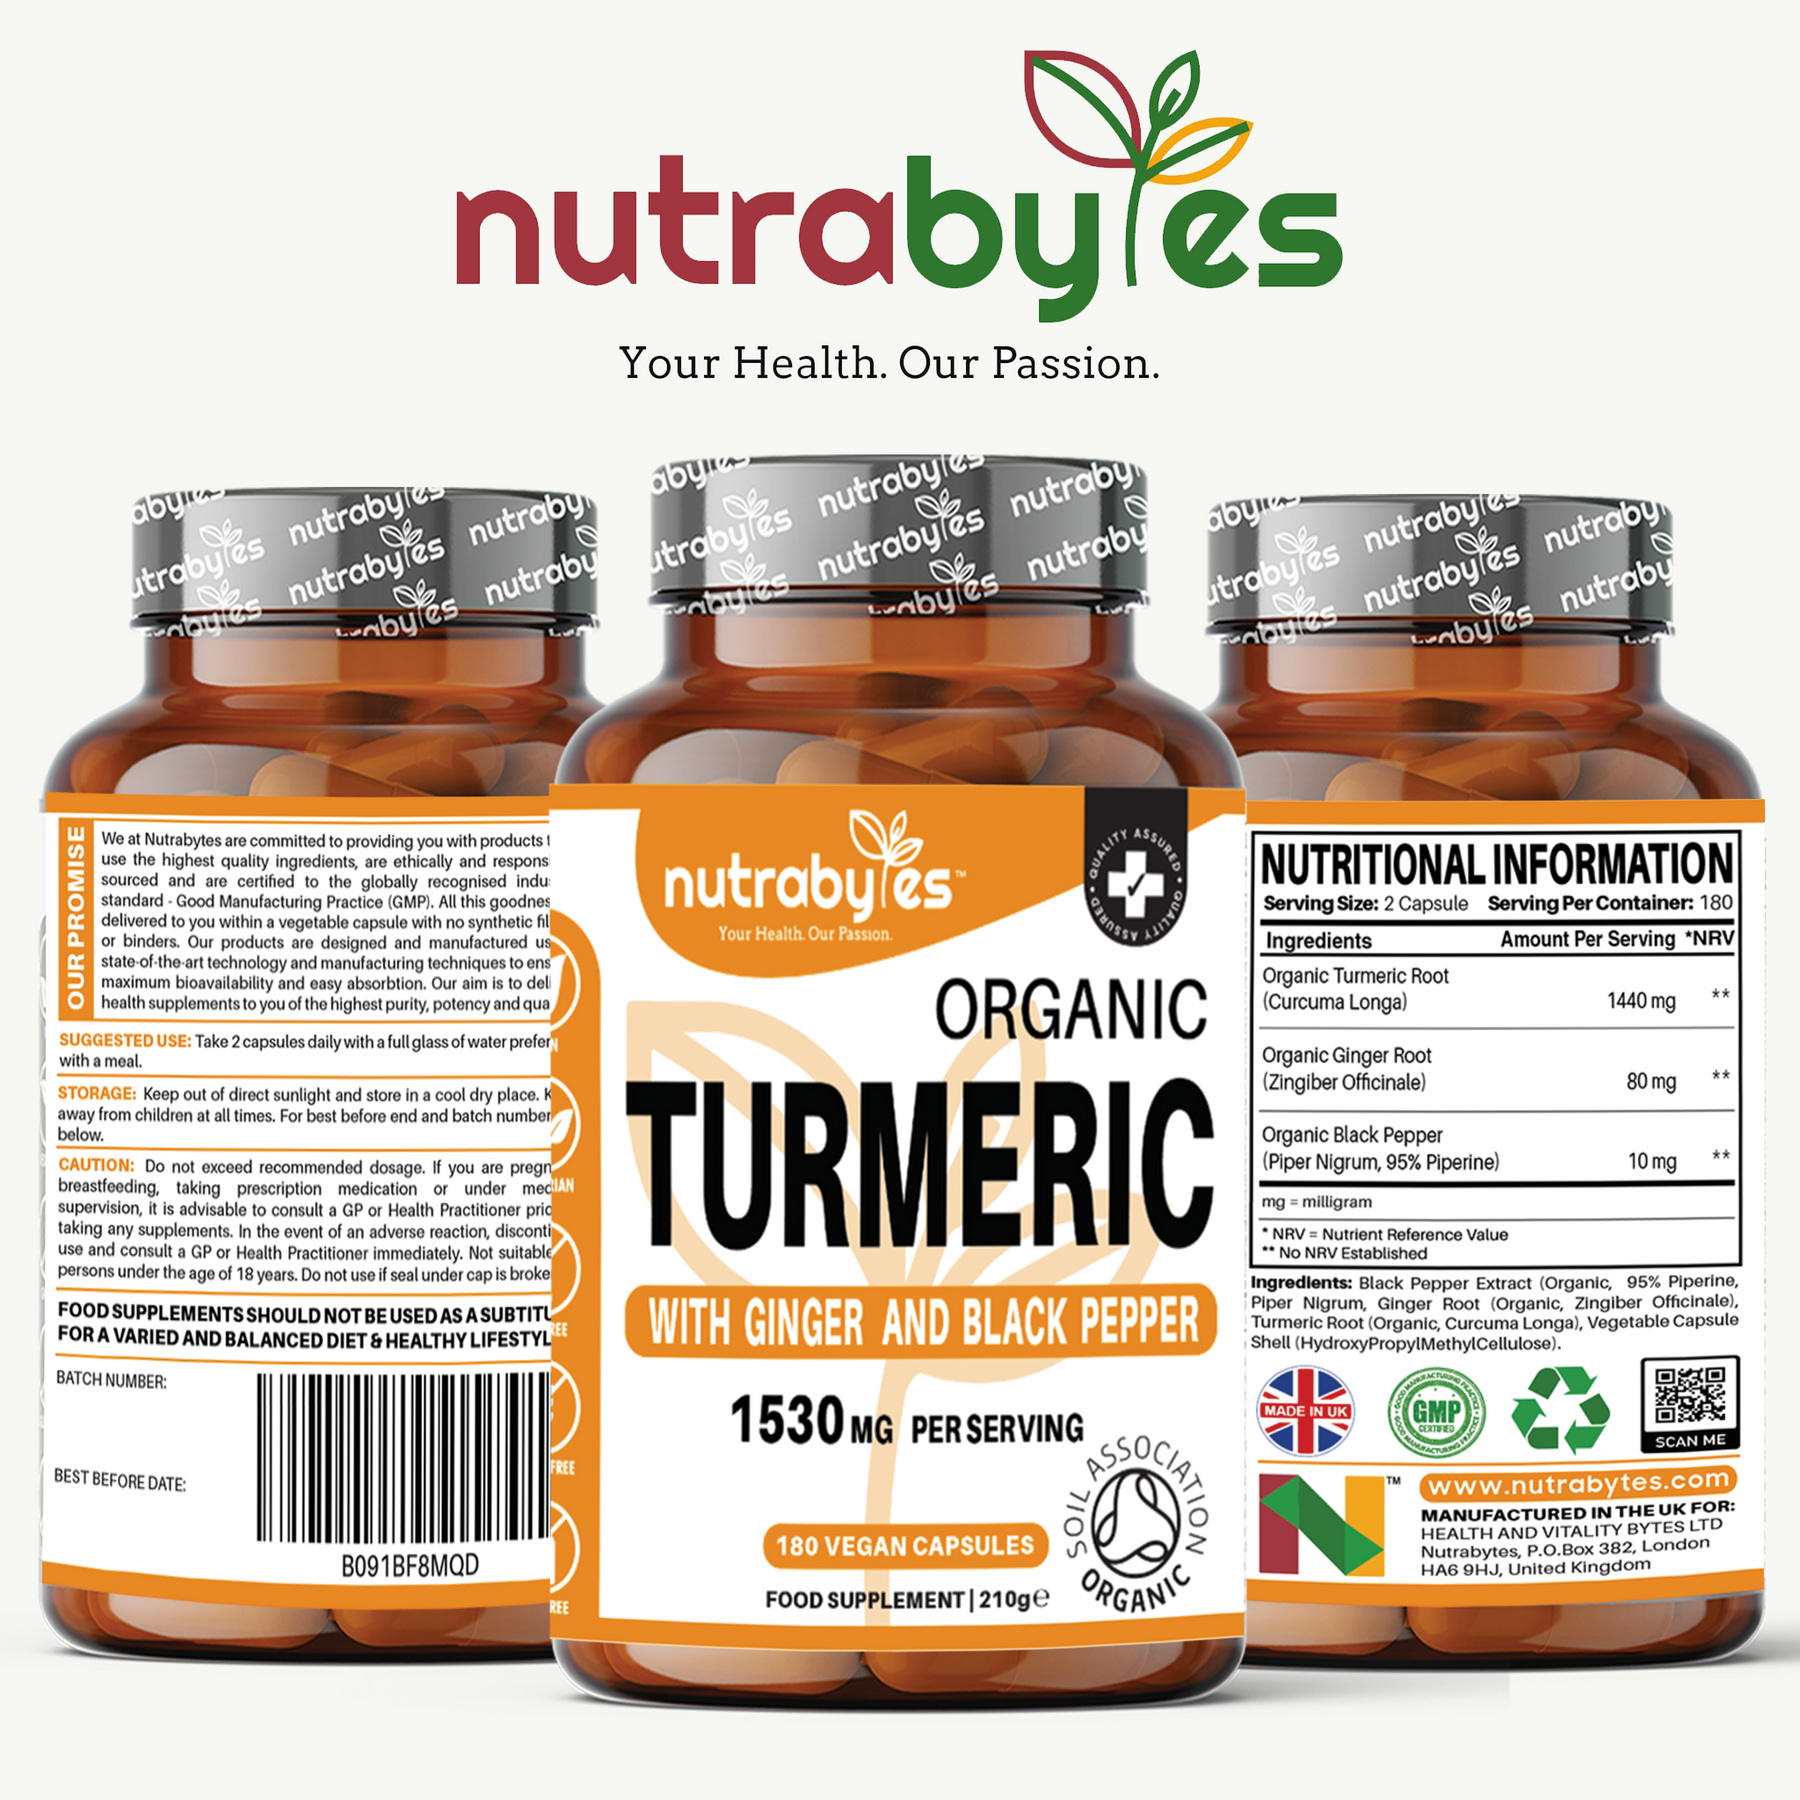 Organic Turmeric Curcumin with Ginger & Black-Pepper, 1530mg, Certified Organic by Soil Association | Made in the UK